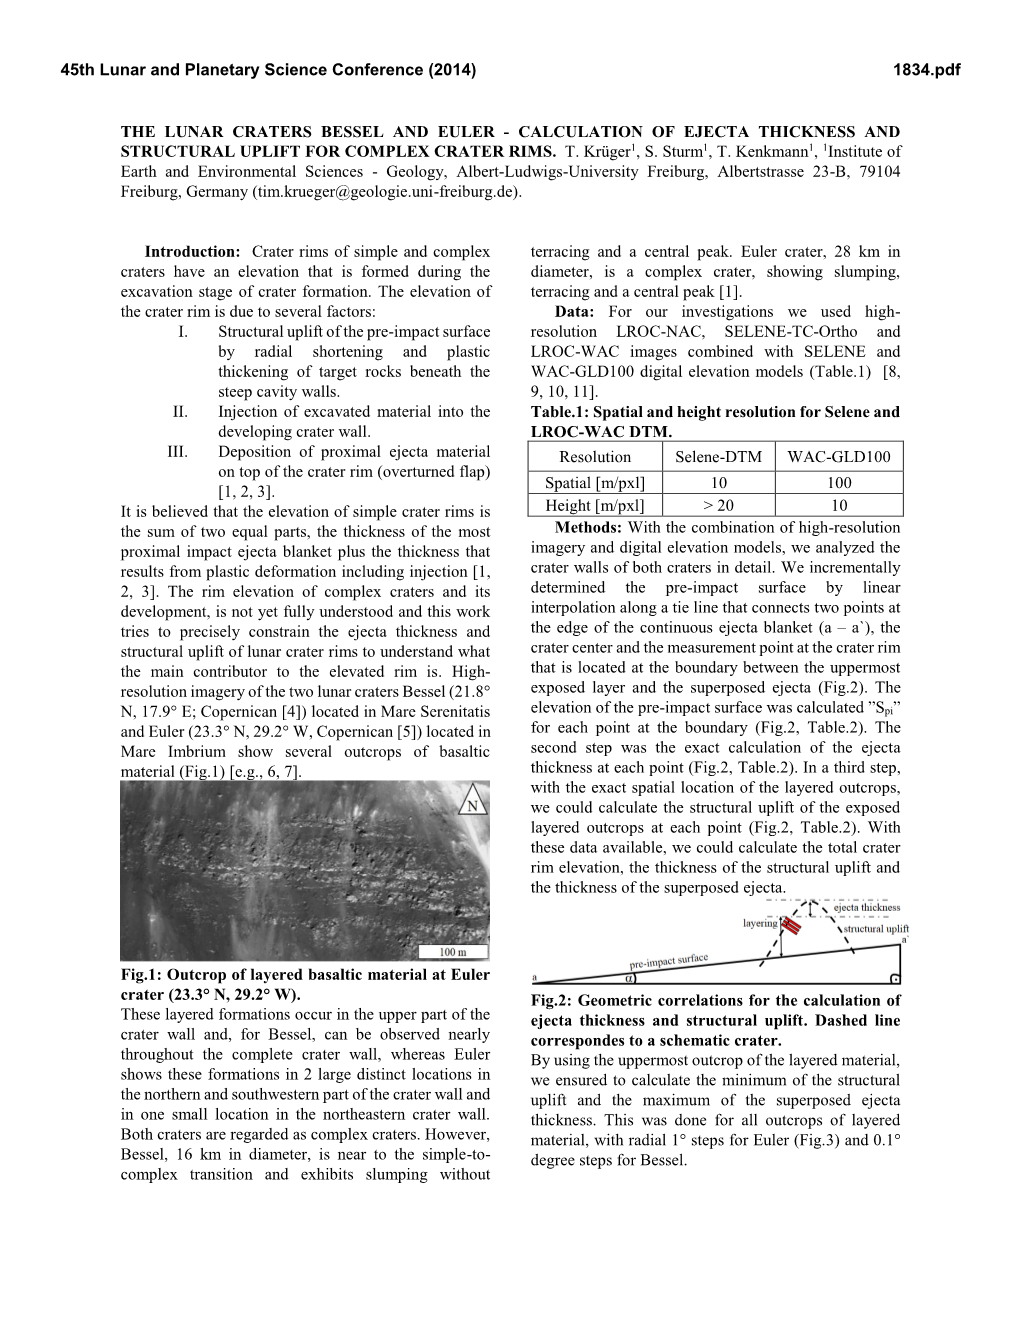 The Lunar Craters Bessel and Euler — Calculation of Ejecta Thickness